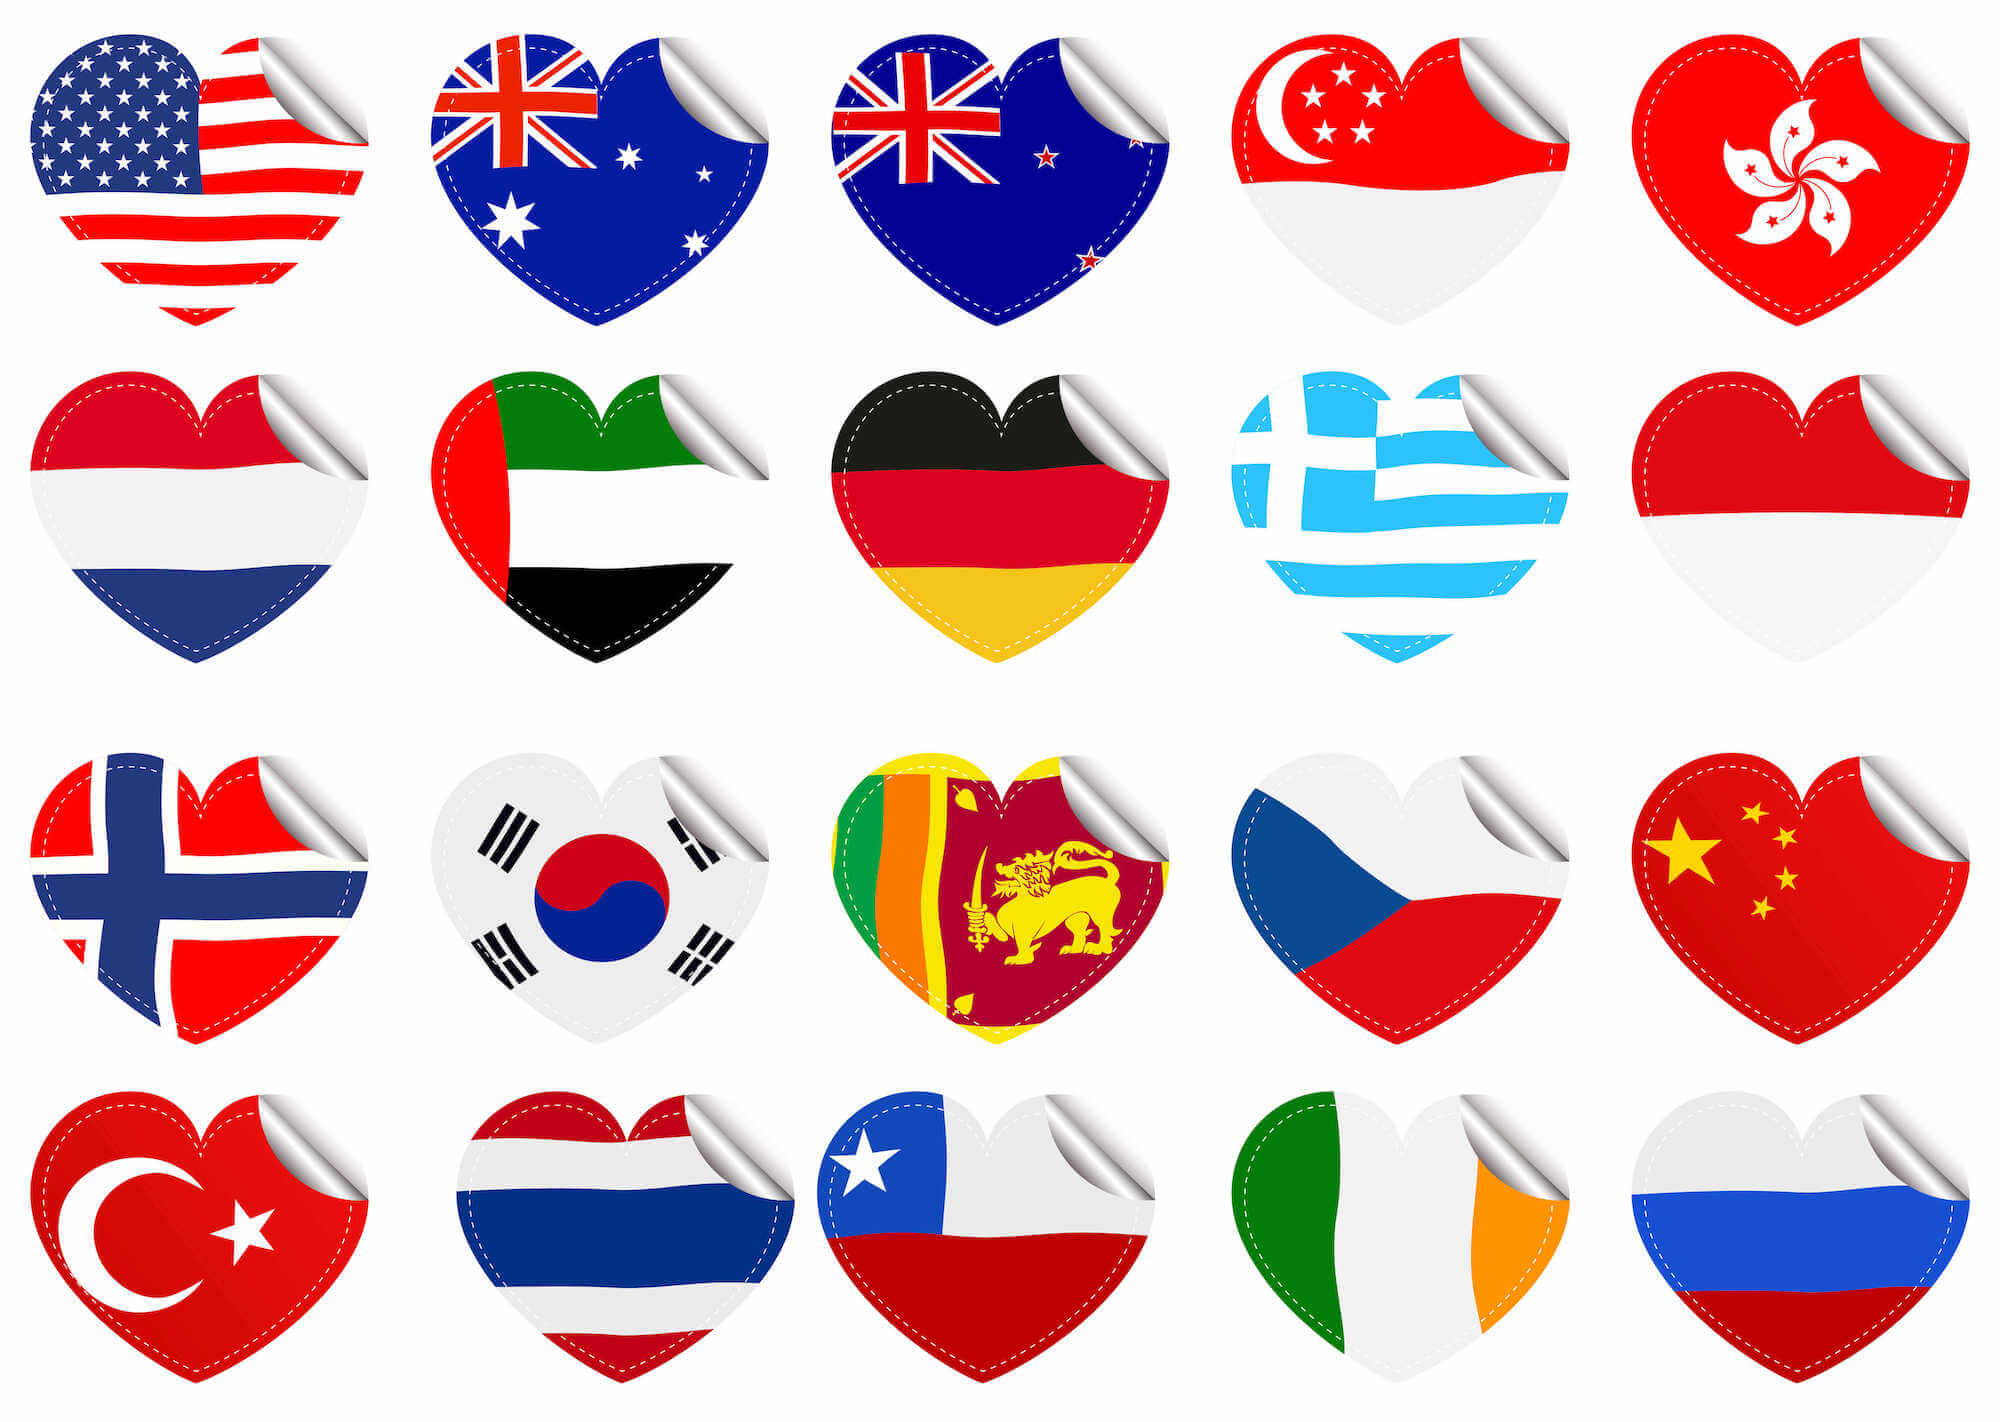 Different countries' flags in the shape of hearts.